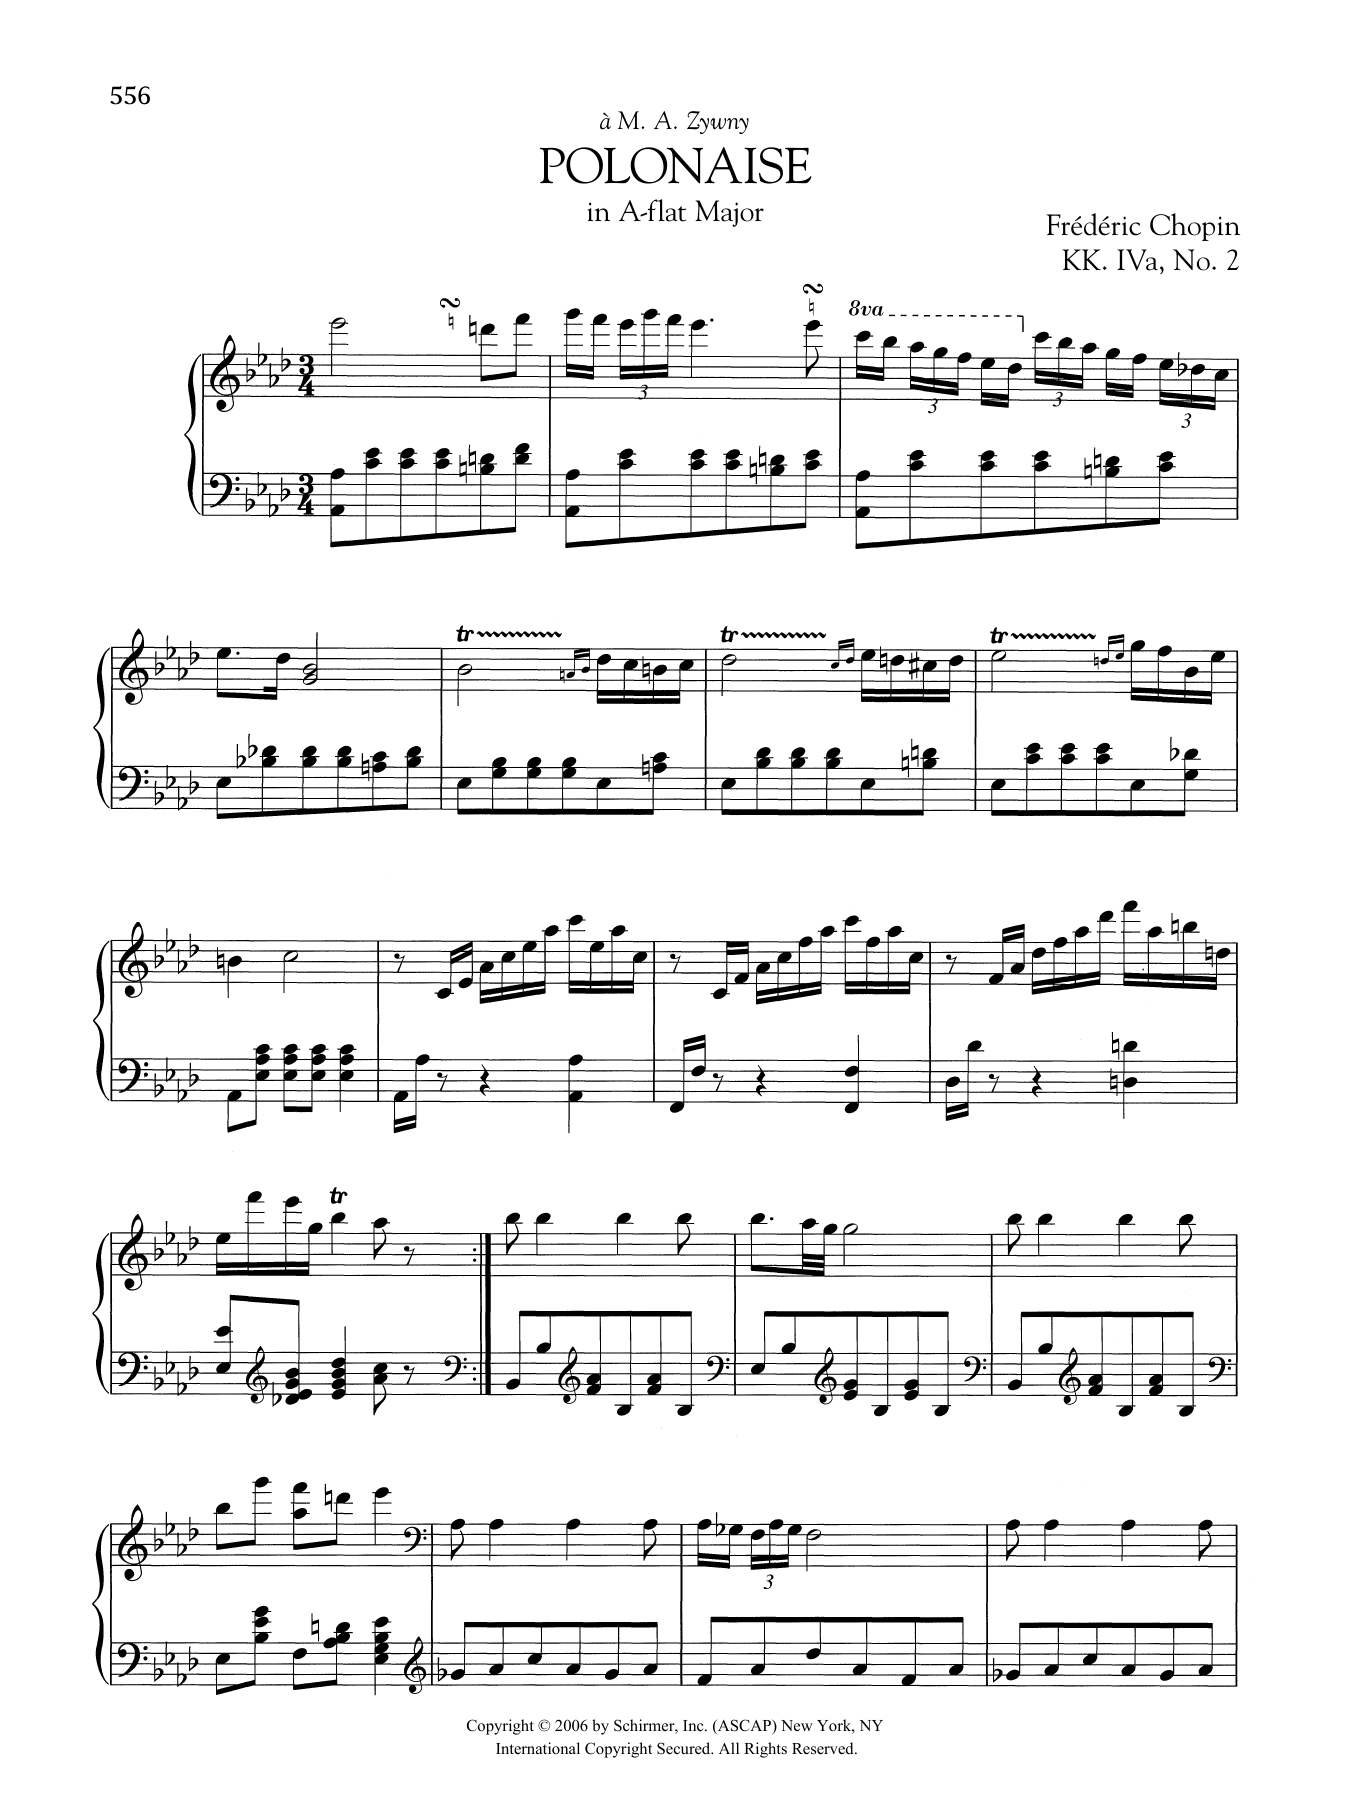 Download Frederic Chopin Polonaise in A-flat Major, KK. IVa, No. Sheet Music